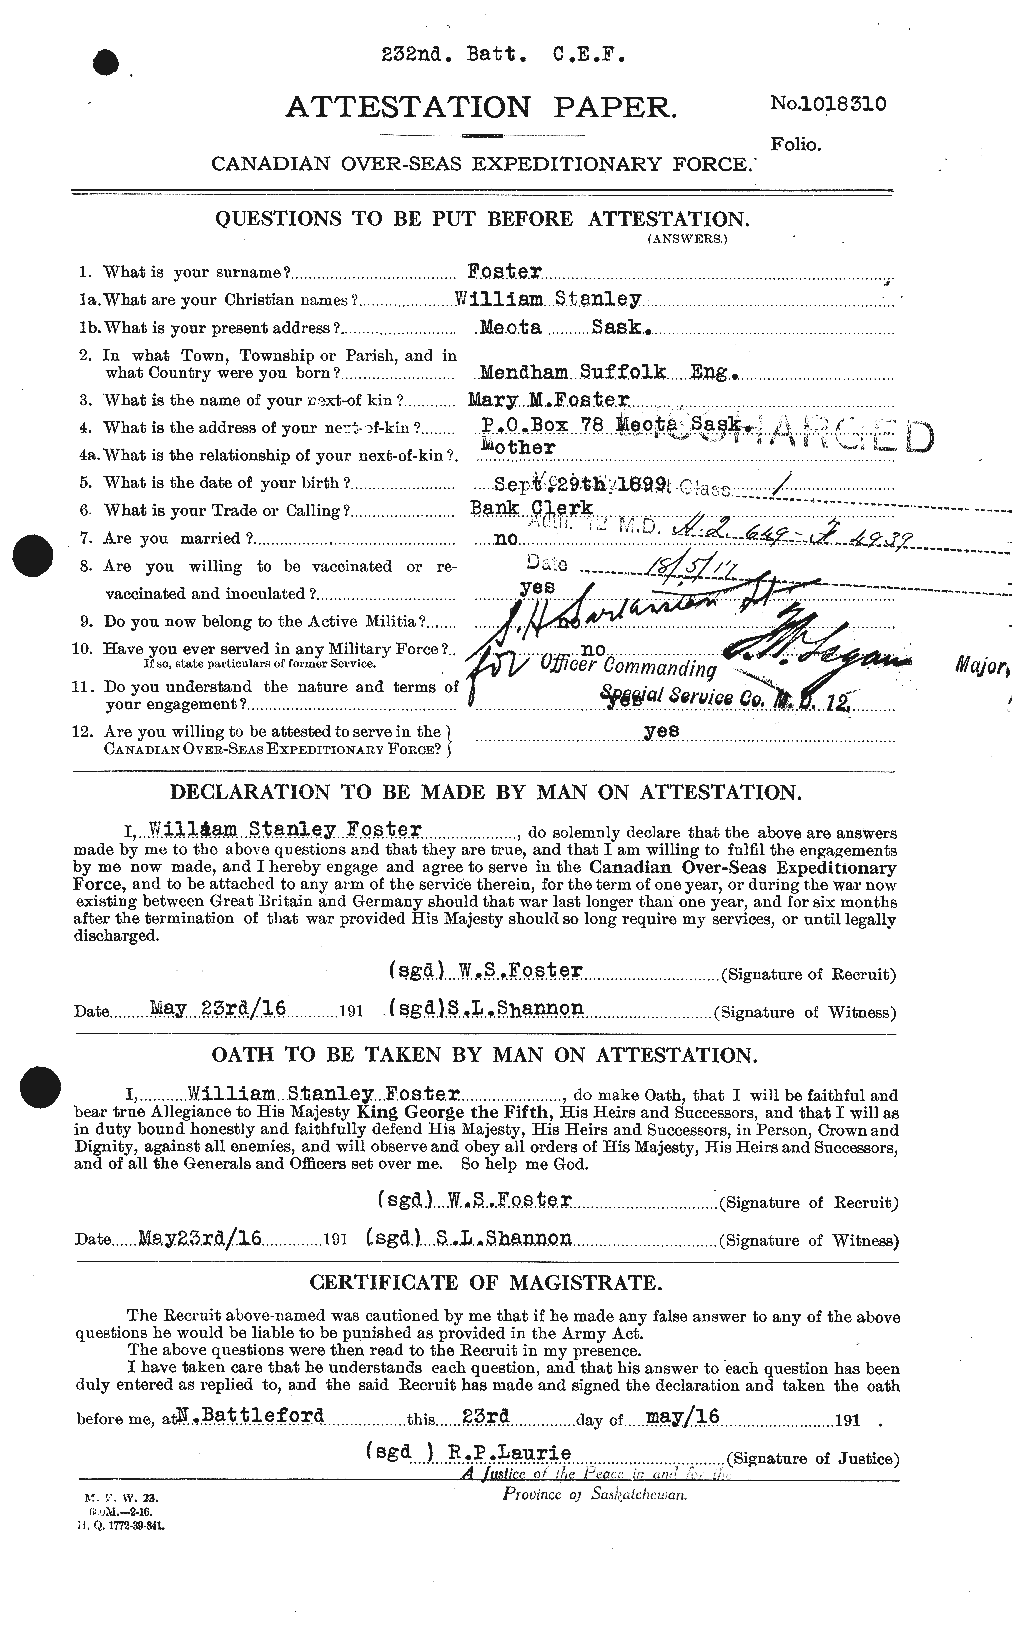 Personnel Records of the First World War - CEF 328773a